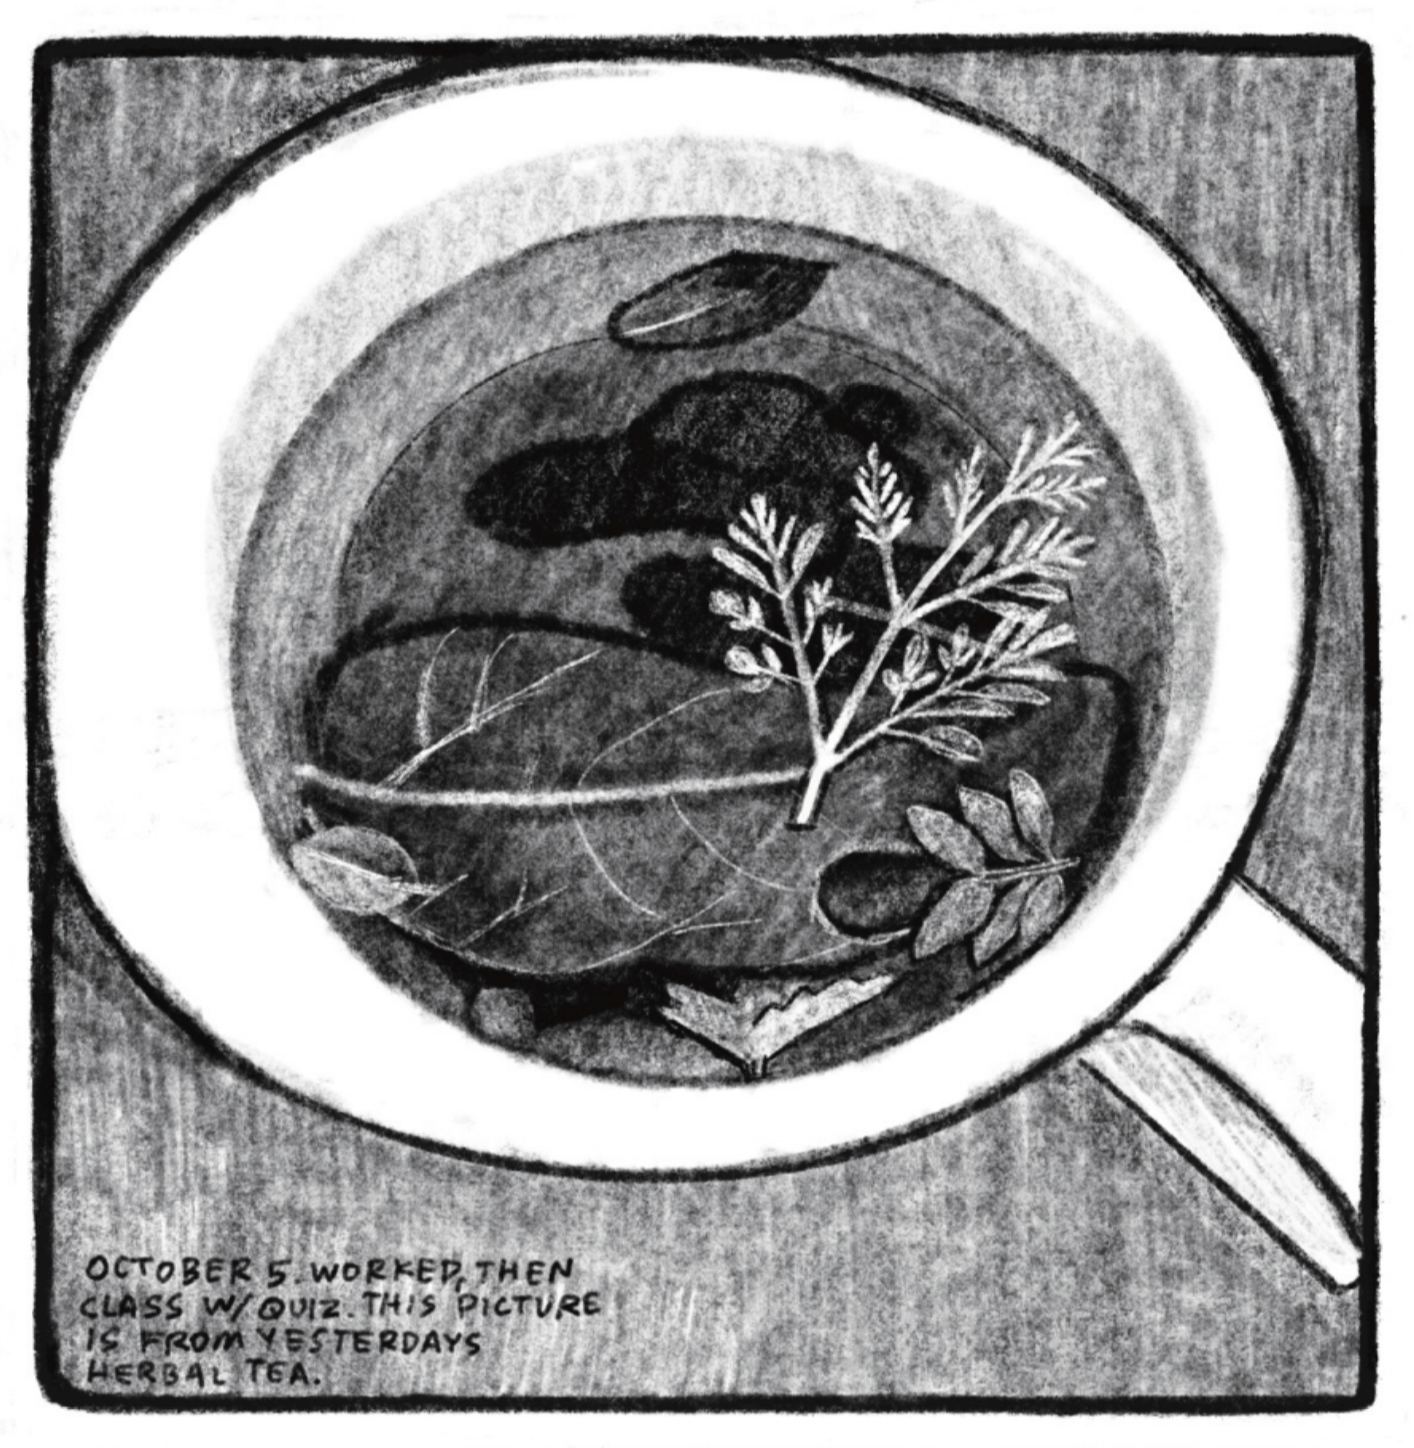 A close-up of a mug filled with different kinds of leaves and tiny flowers to make herbal tea. â€œOctober 5. Worked, then class with quiz. This picture is from yesterdayâ€™s herbal tea.â€